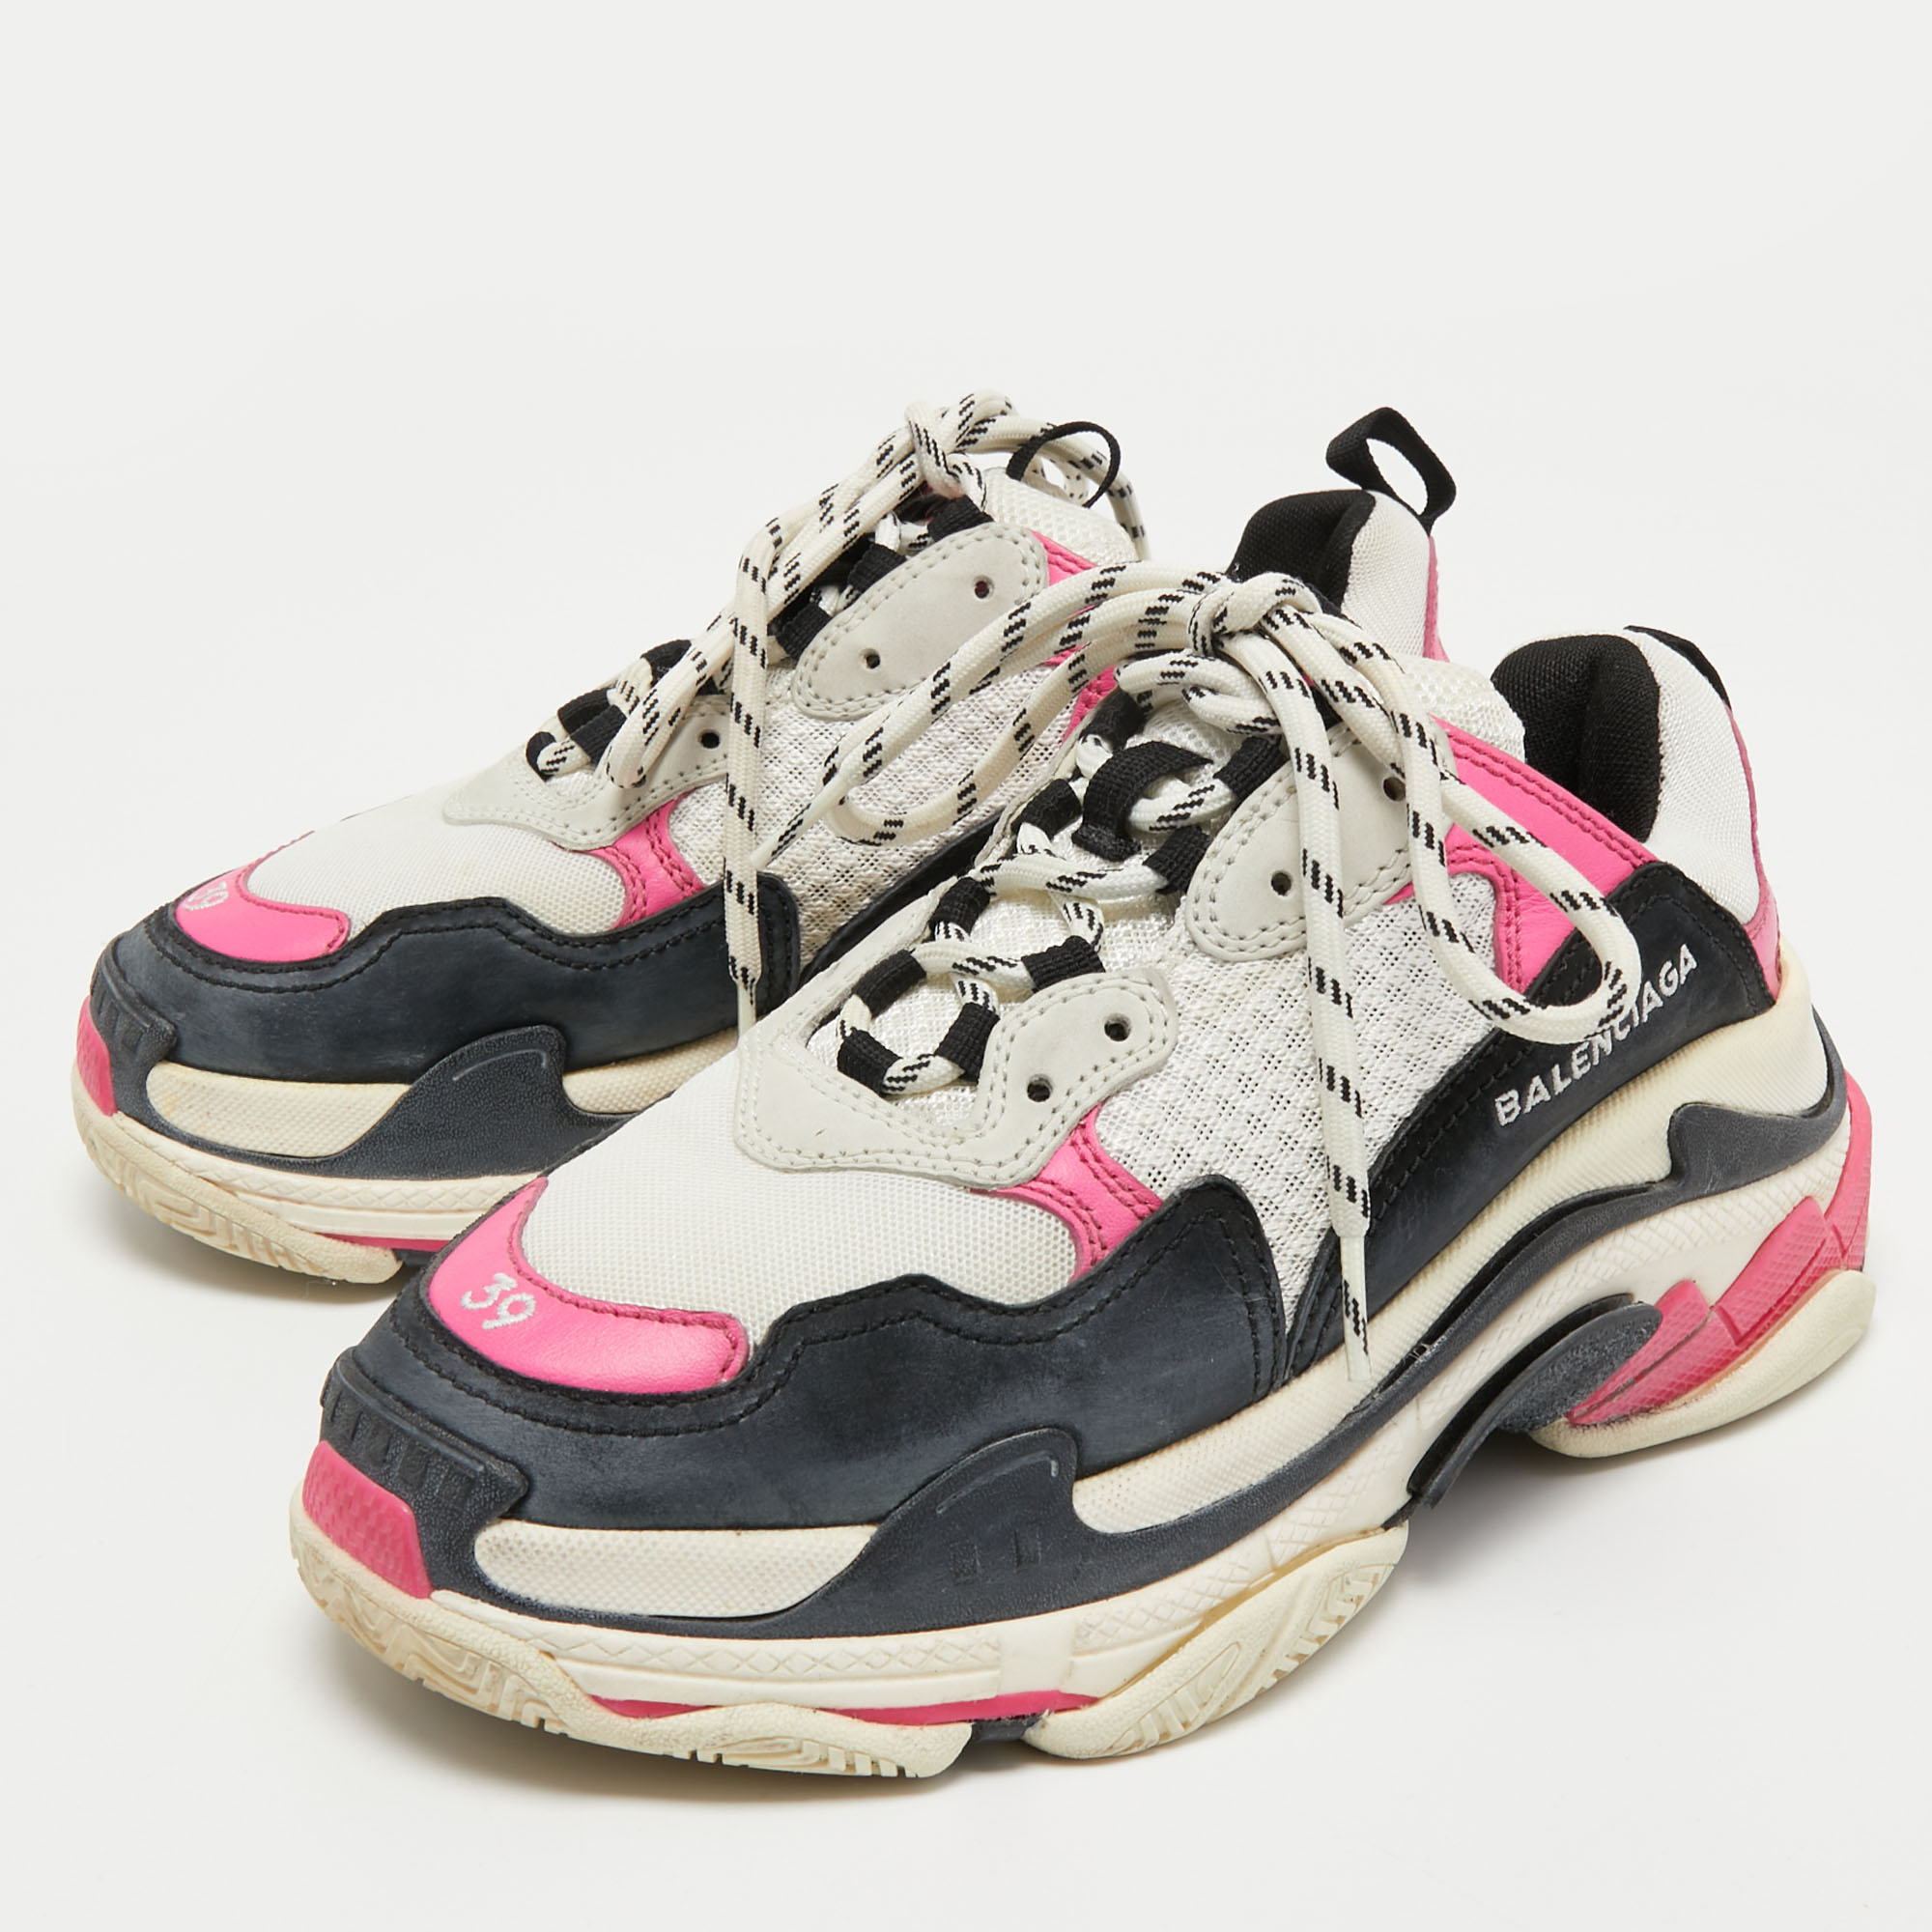 

Balenciaga Tricolor Leather and Mesh Triple S Sneakers Size, White